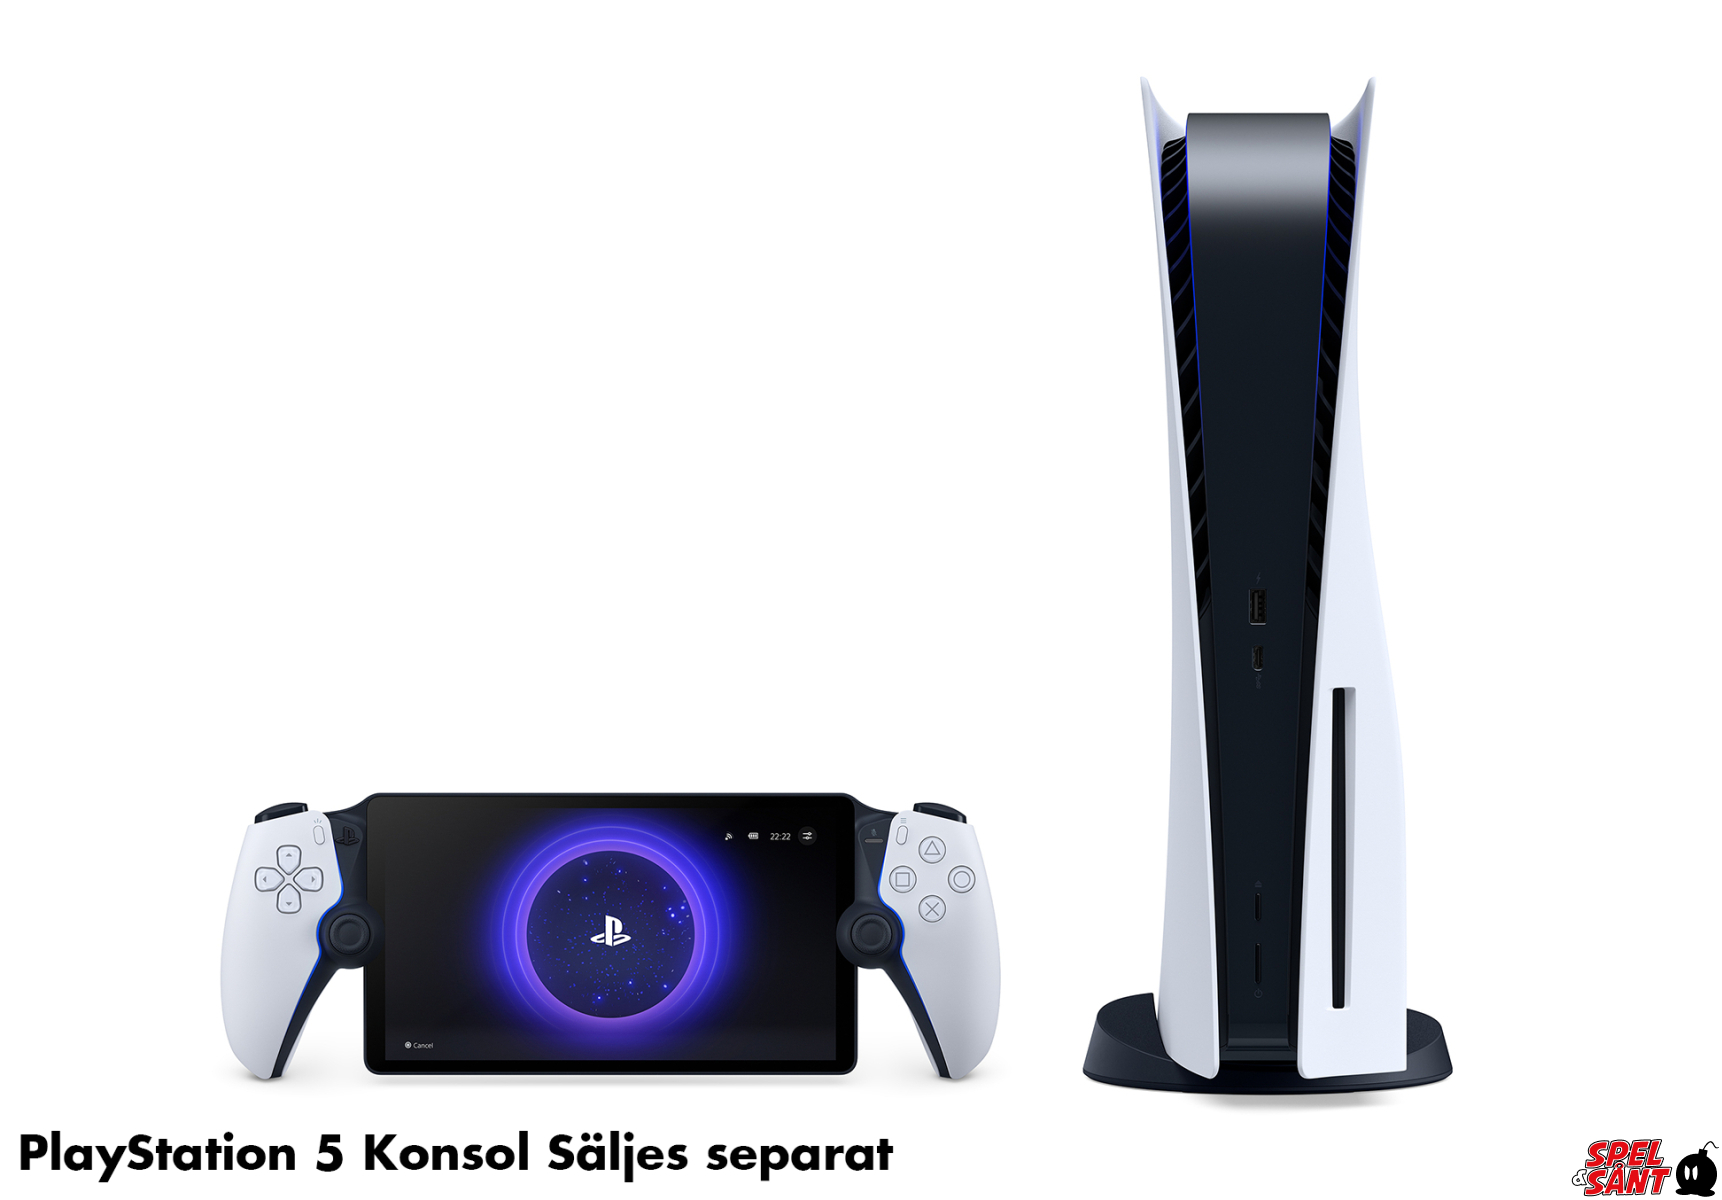 PS5 PlayStation Portal Remote Player, PS5, Pre-Order Now